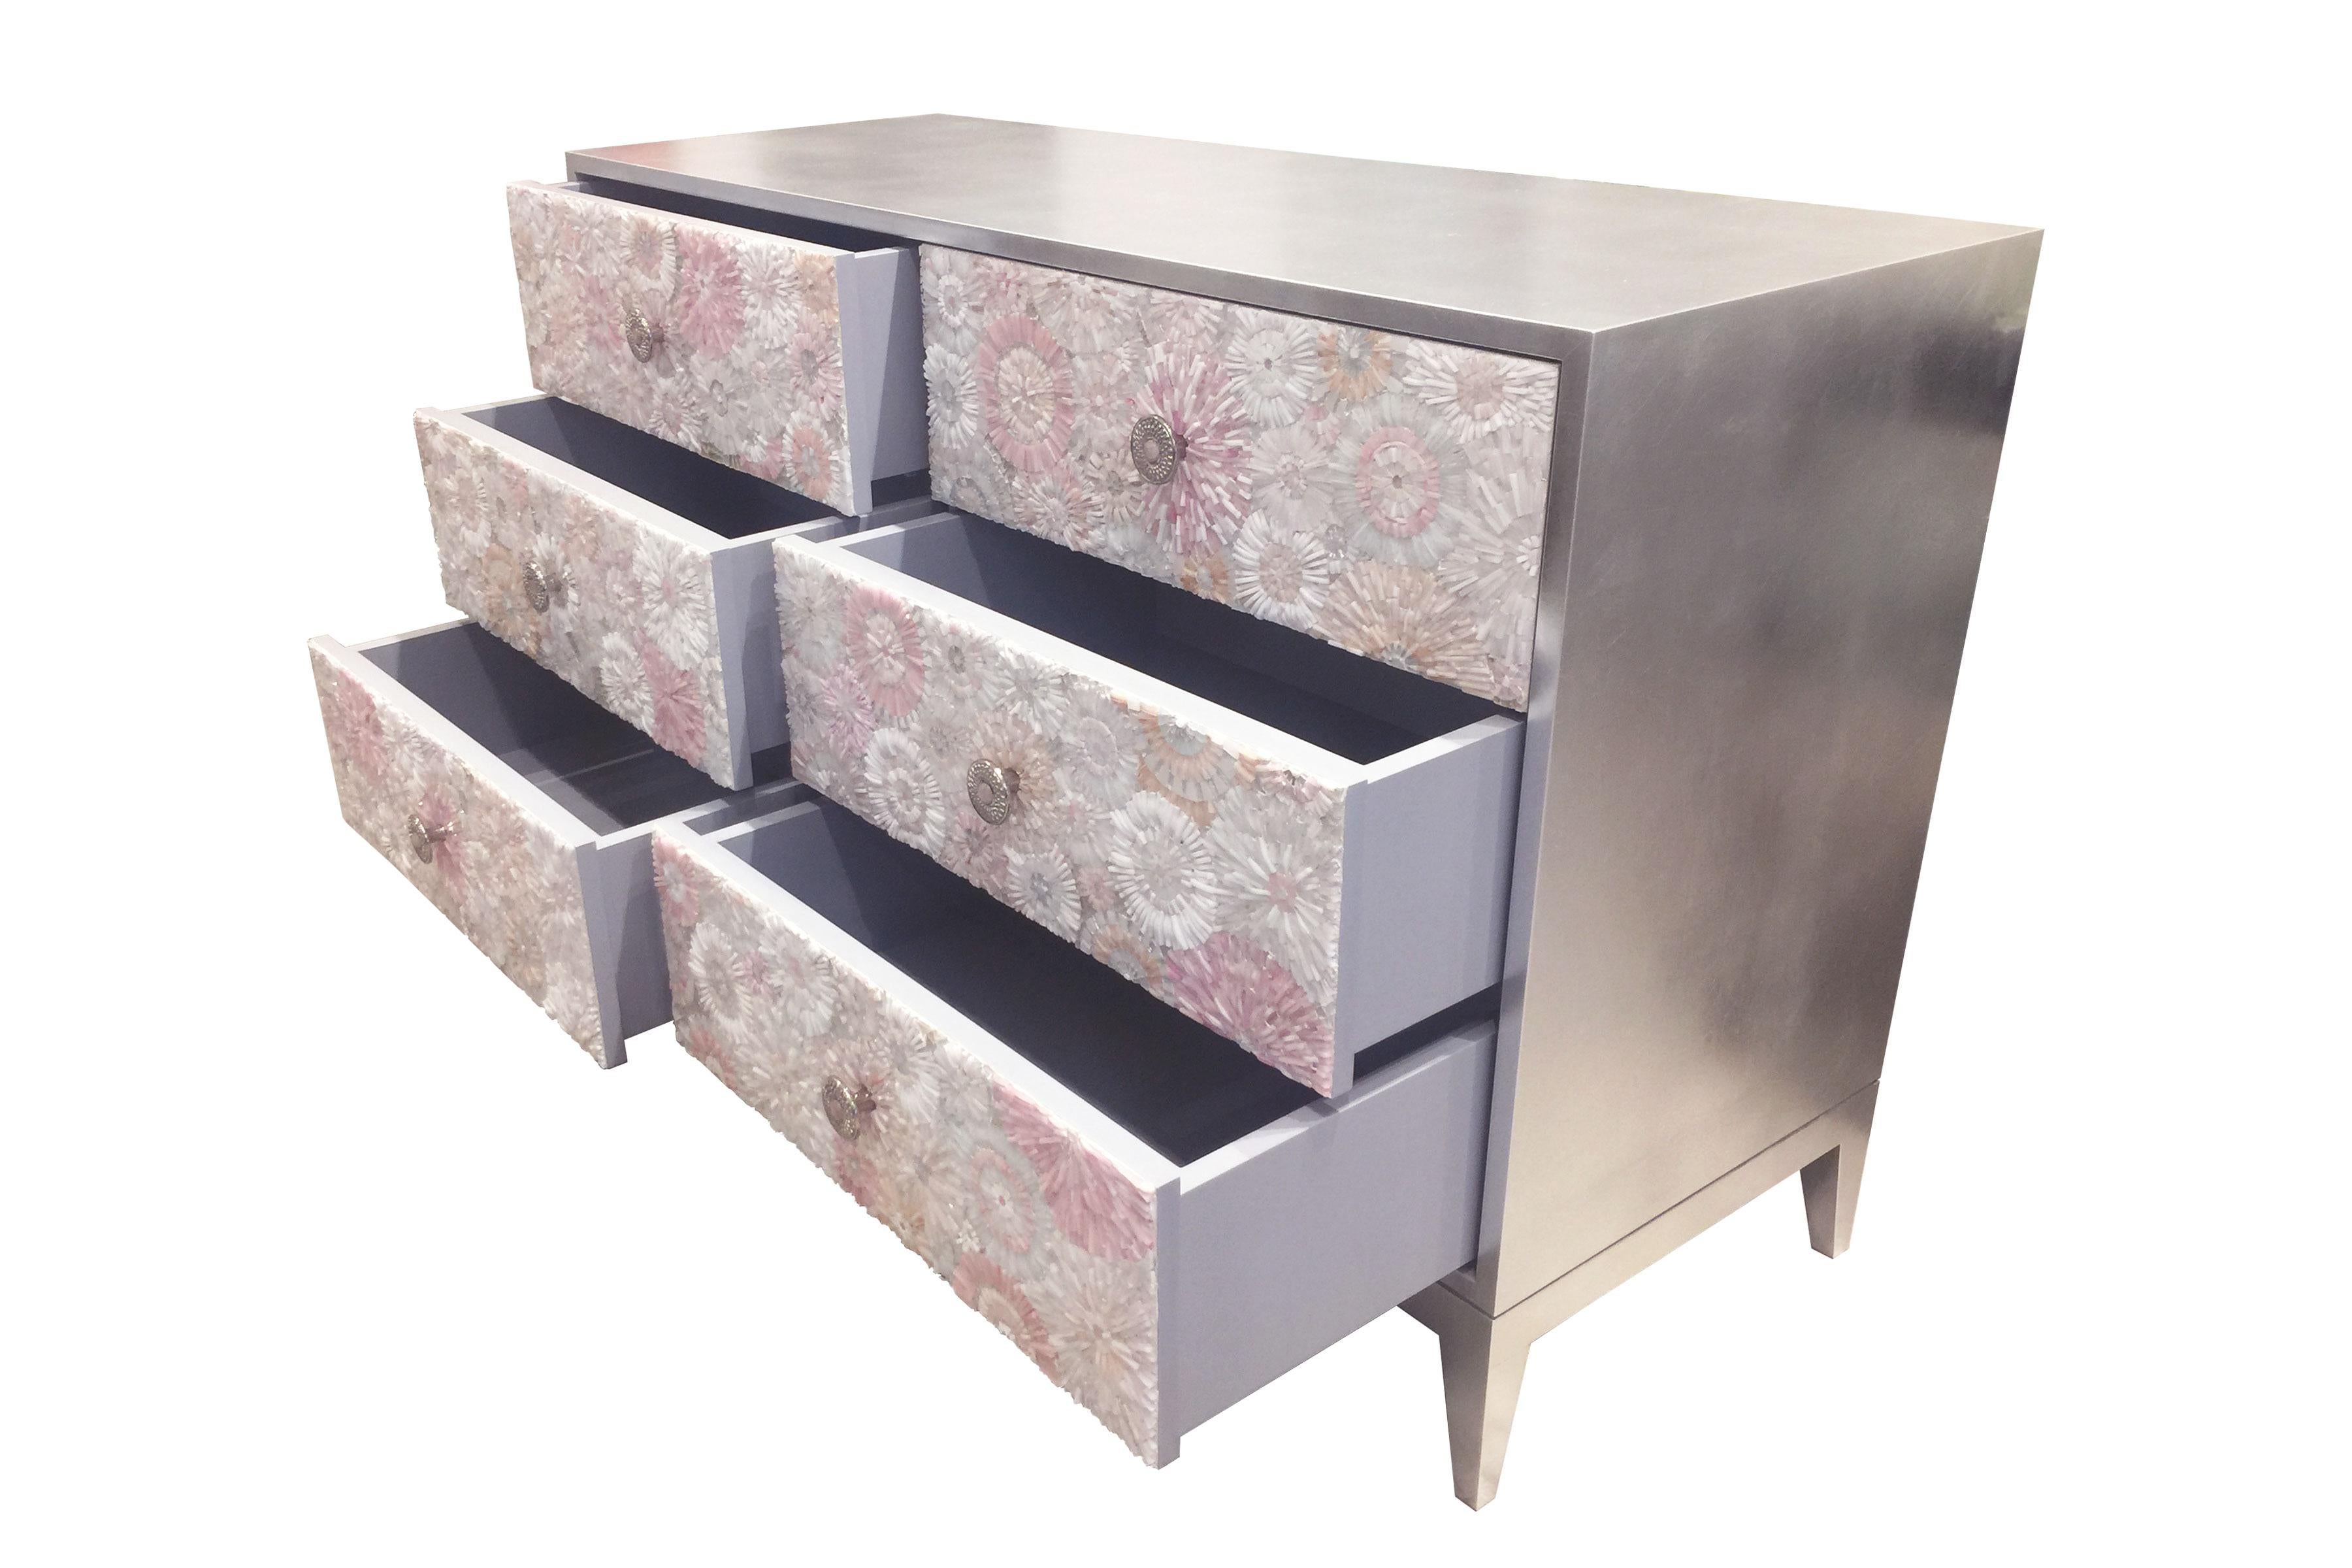 The blossom chest of drawers by Ercole Home has a 6-drawer front, with silver leaf finish on wood.
handcut glass mosaic in variety shades of white and pink decorate the surface in Blossom patterns.
The decorative solid brass pulls in nickel finish